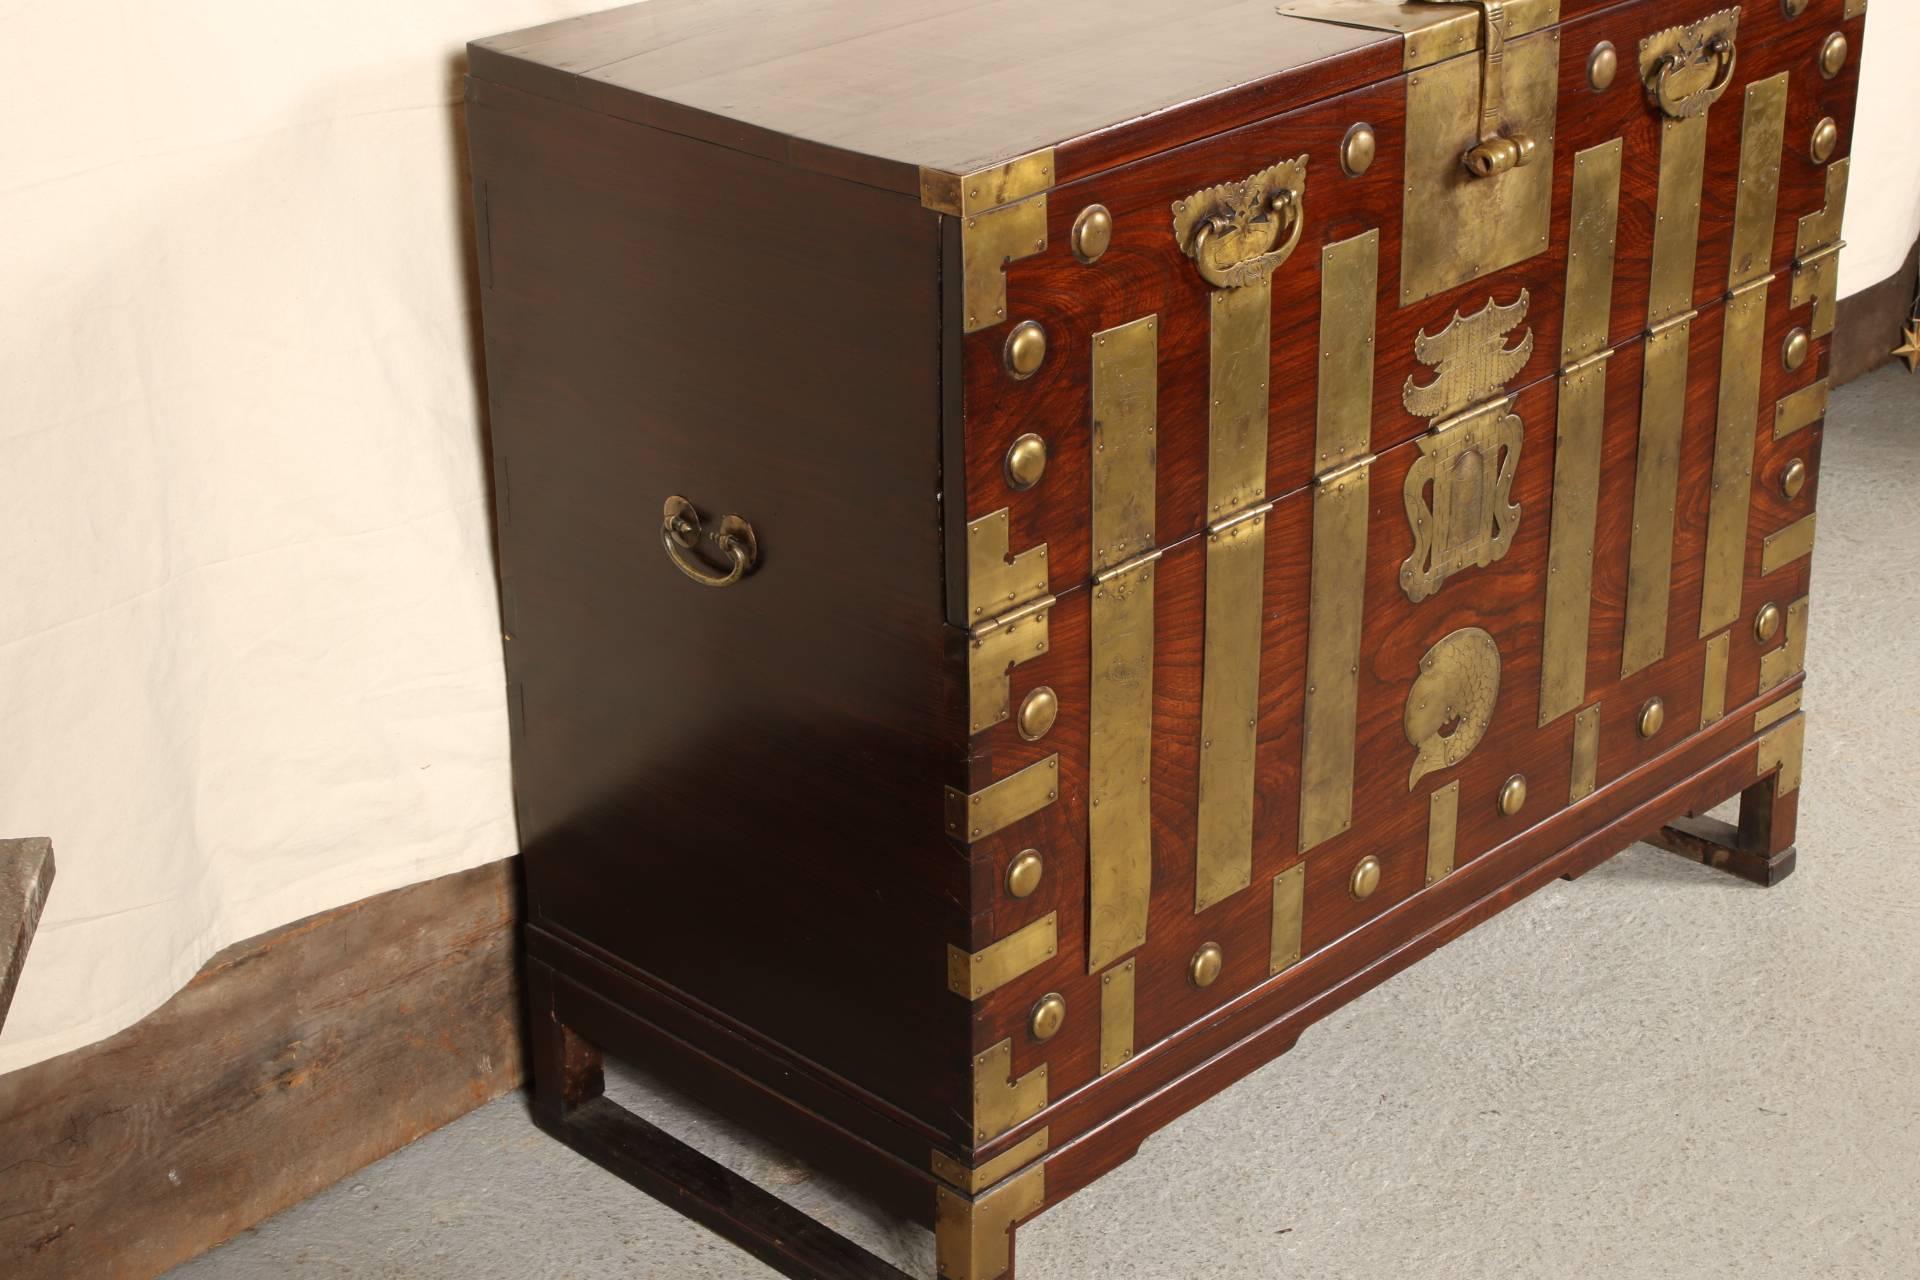 With heavy brass incised fittings. Three planks on the top with a heavy centre latch. A hinged drop down front panel with two brass handles. The centre front with brass pagoda and fish attachments. The entire front decorated with incised panels